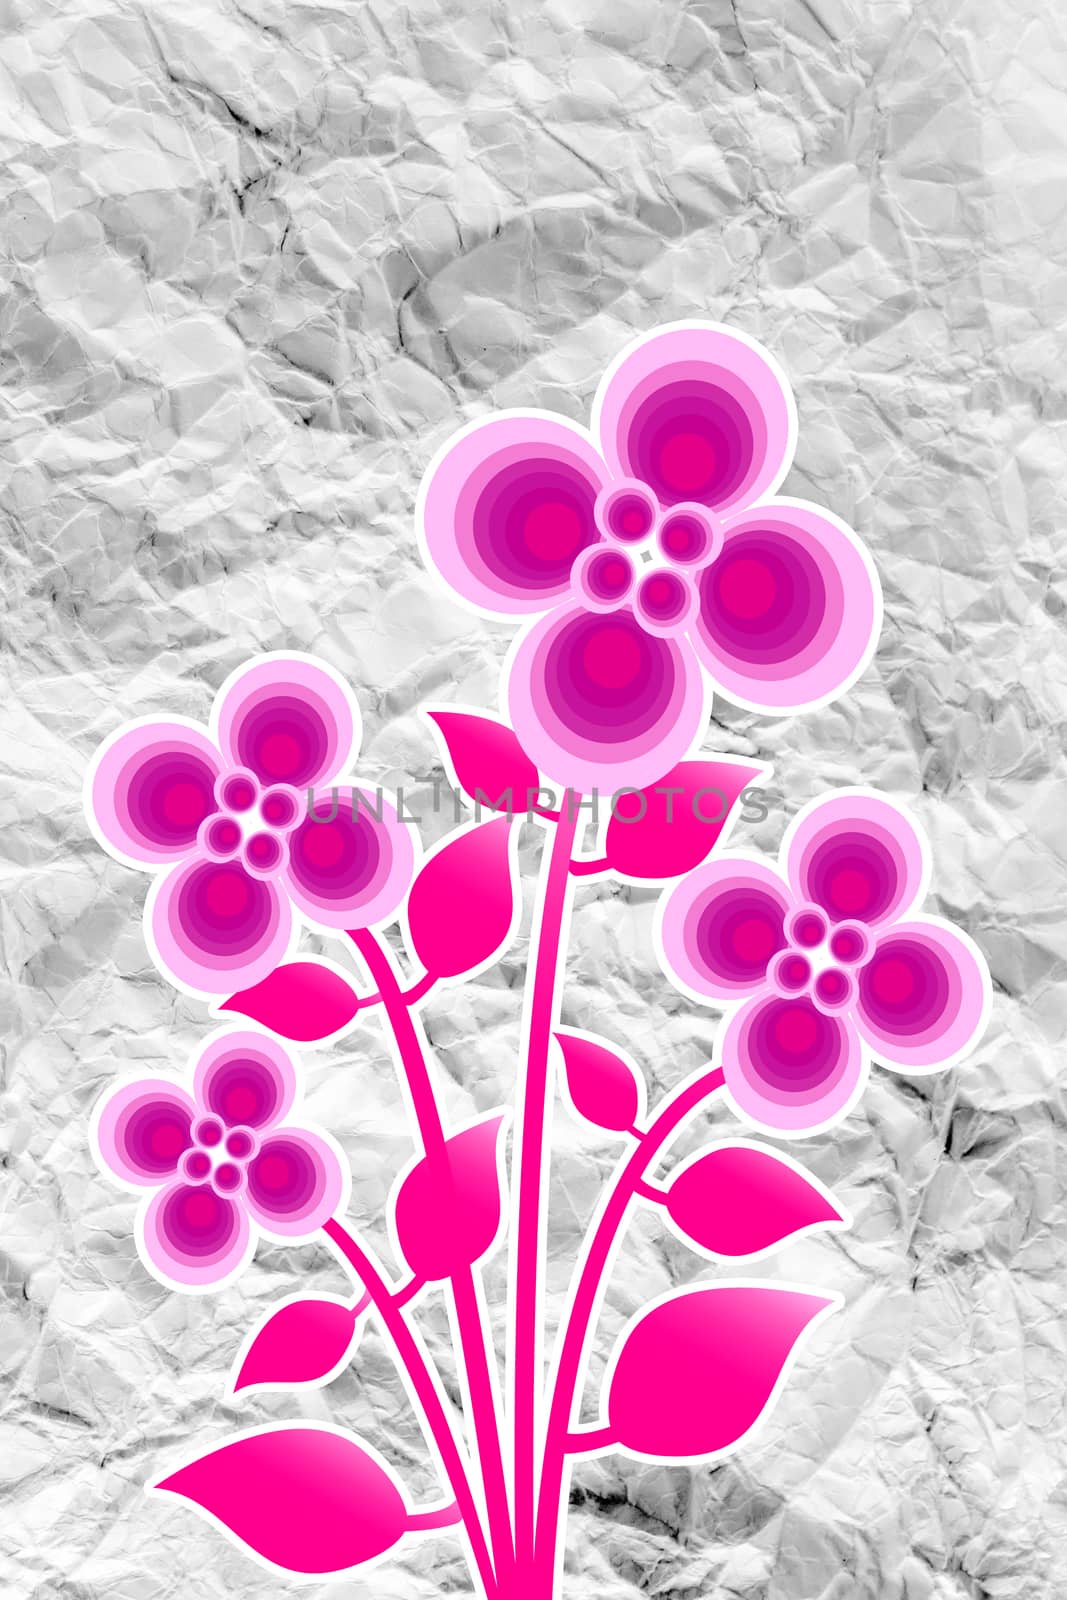 Flowers design on crumpled paper